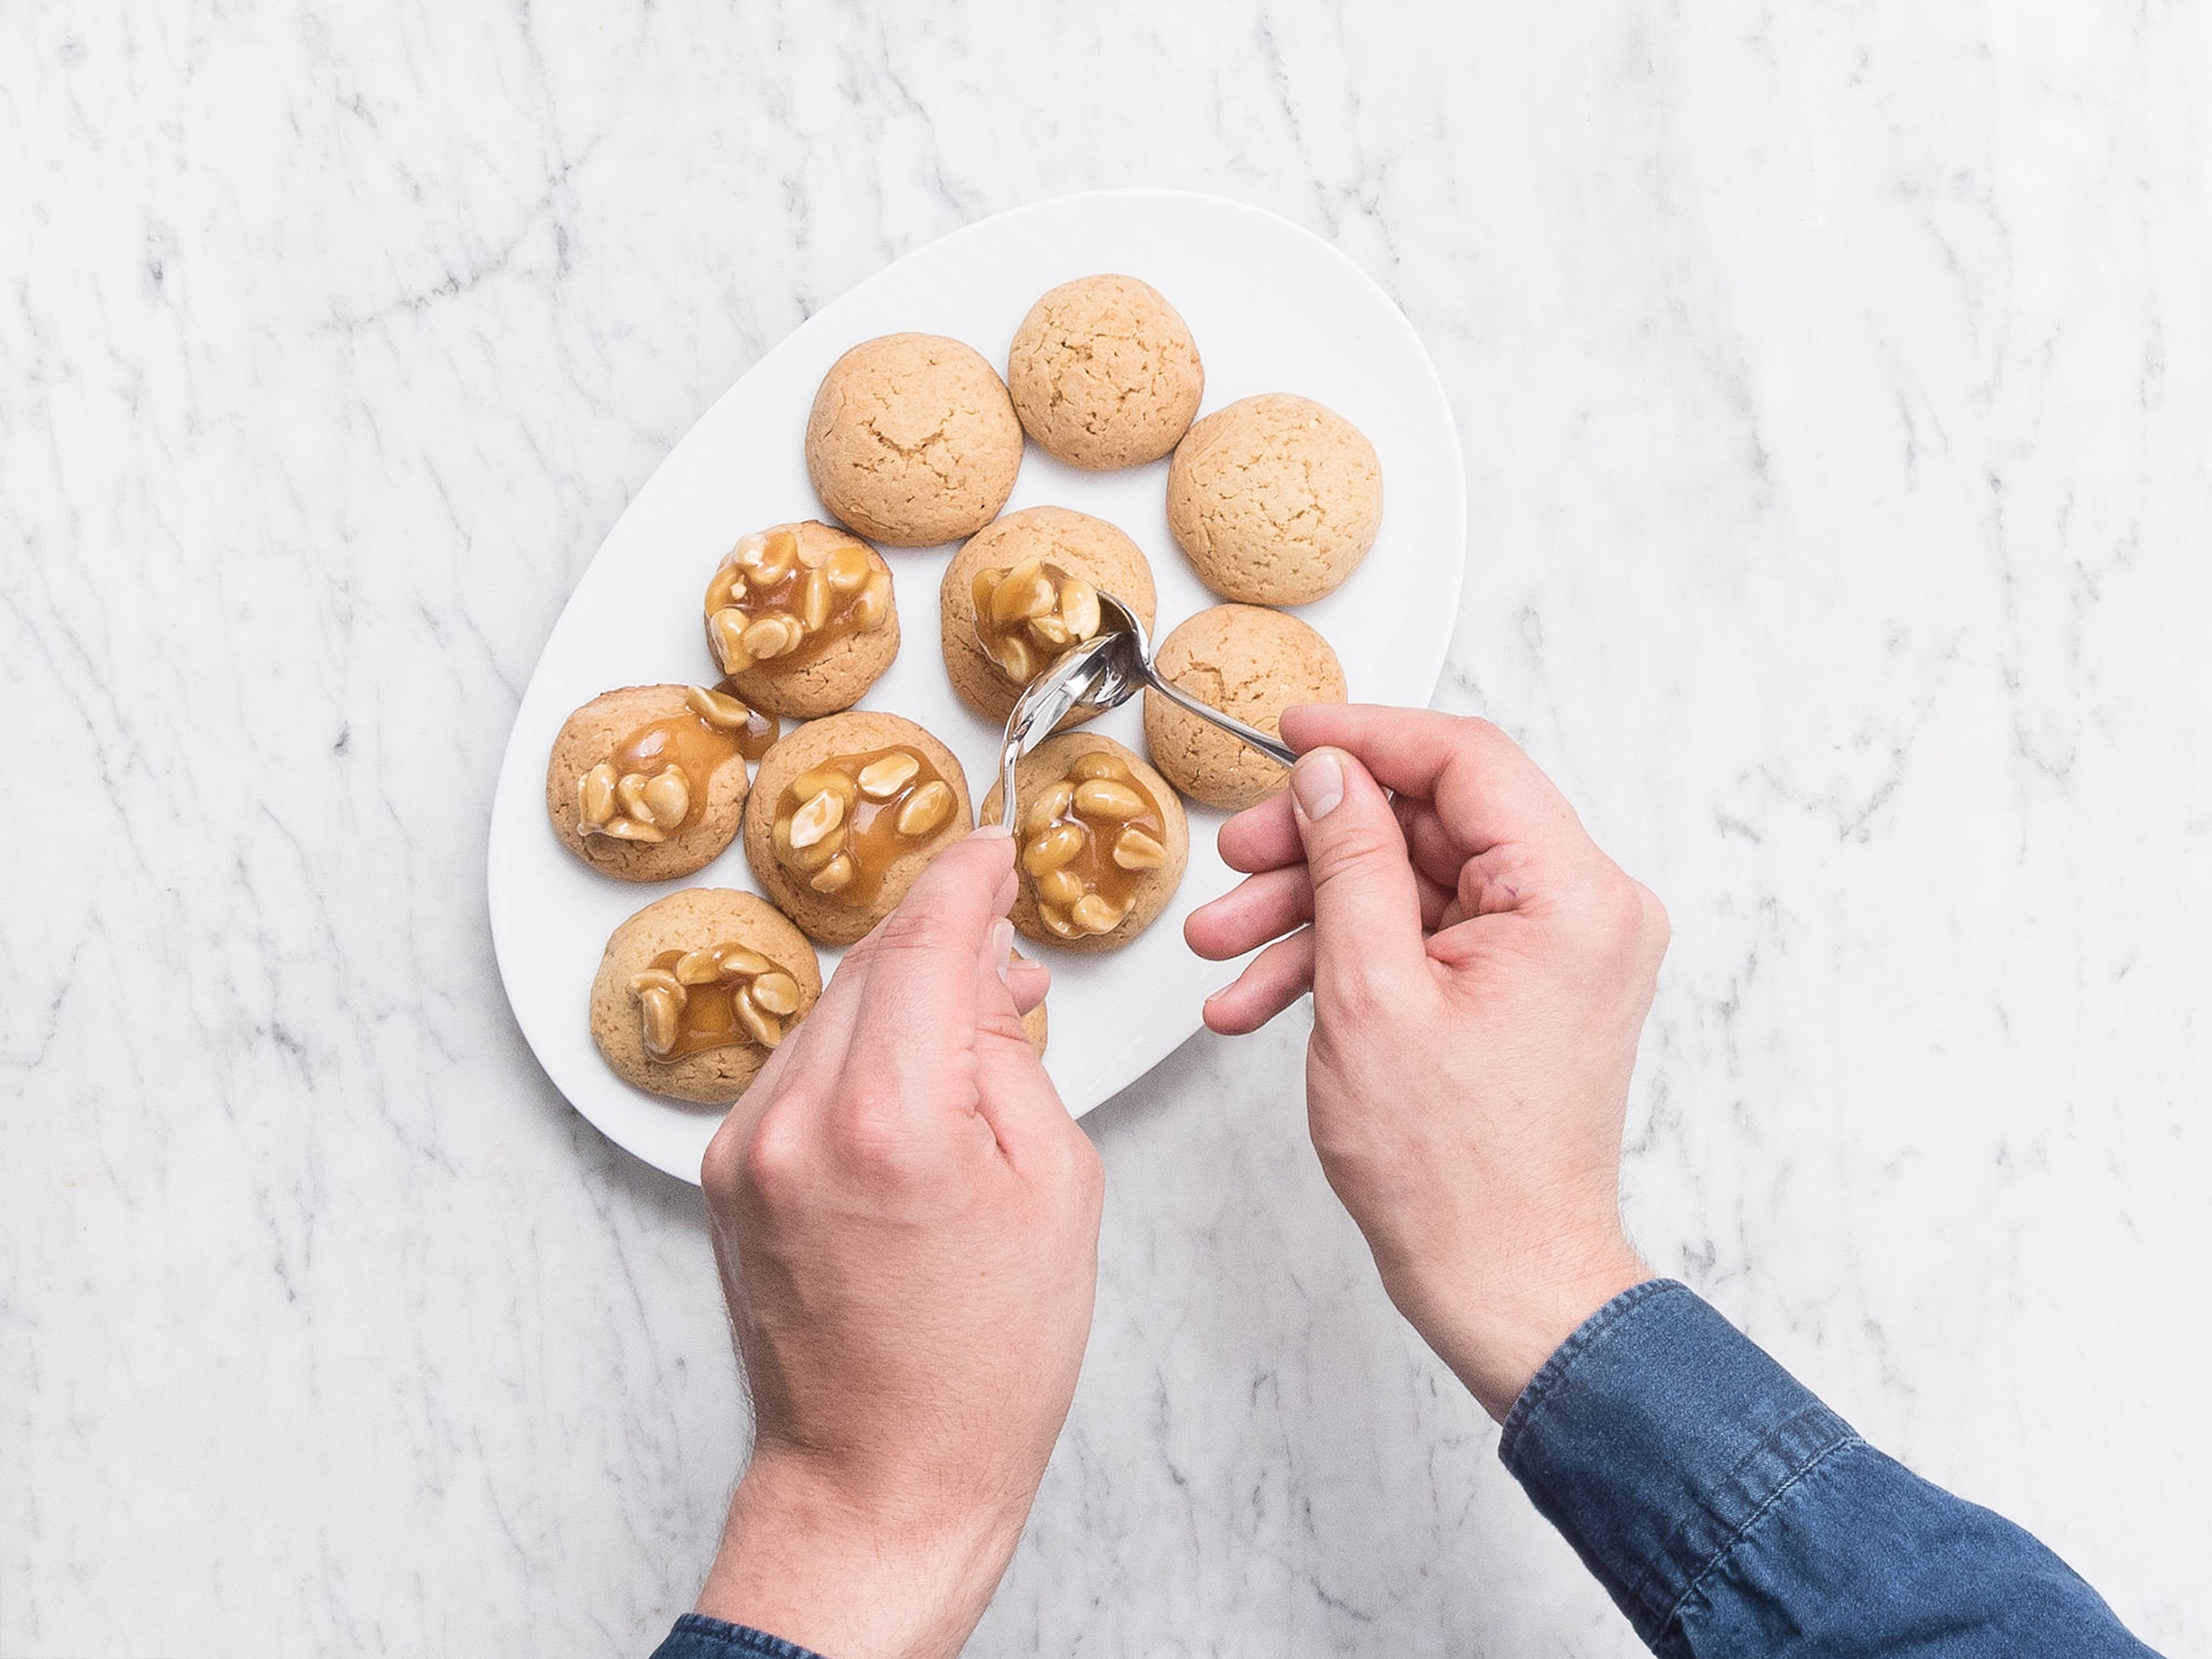 Spoon honey caramel onto the cooled cookies, top with fleur de sel, and chill in the fridge for a further approx. 5 min. to ensure the caramel sets. Enjoy!